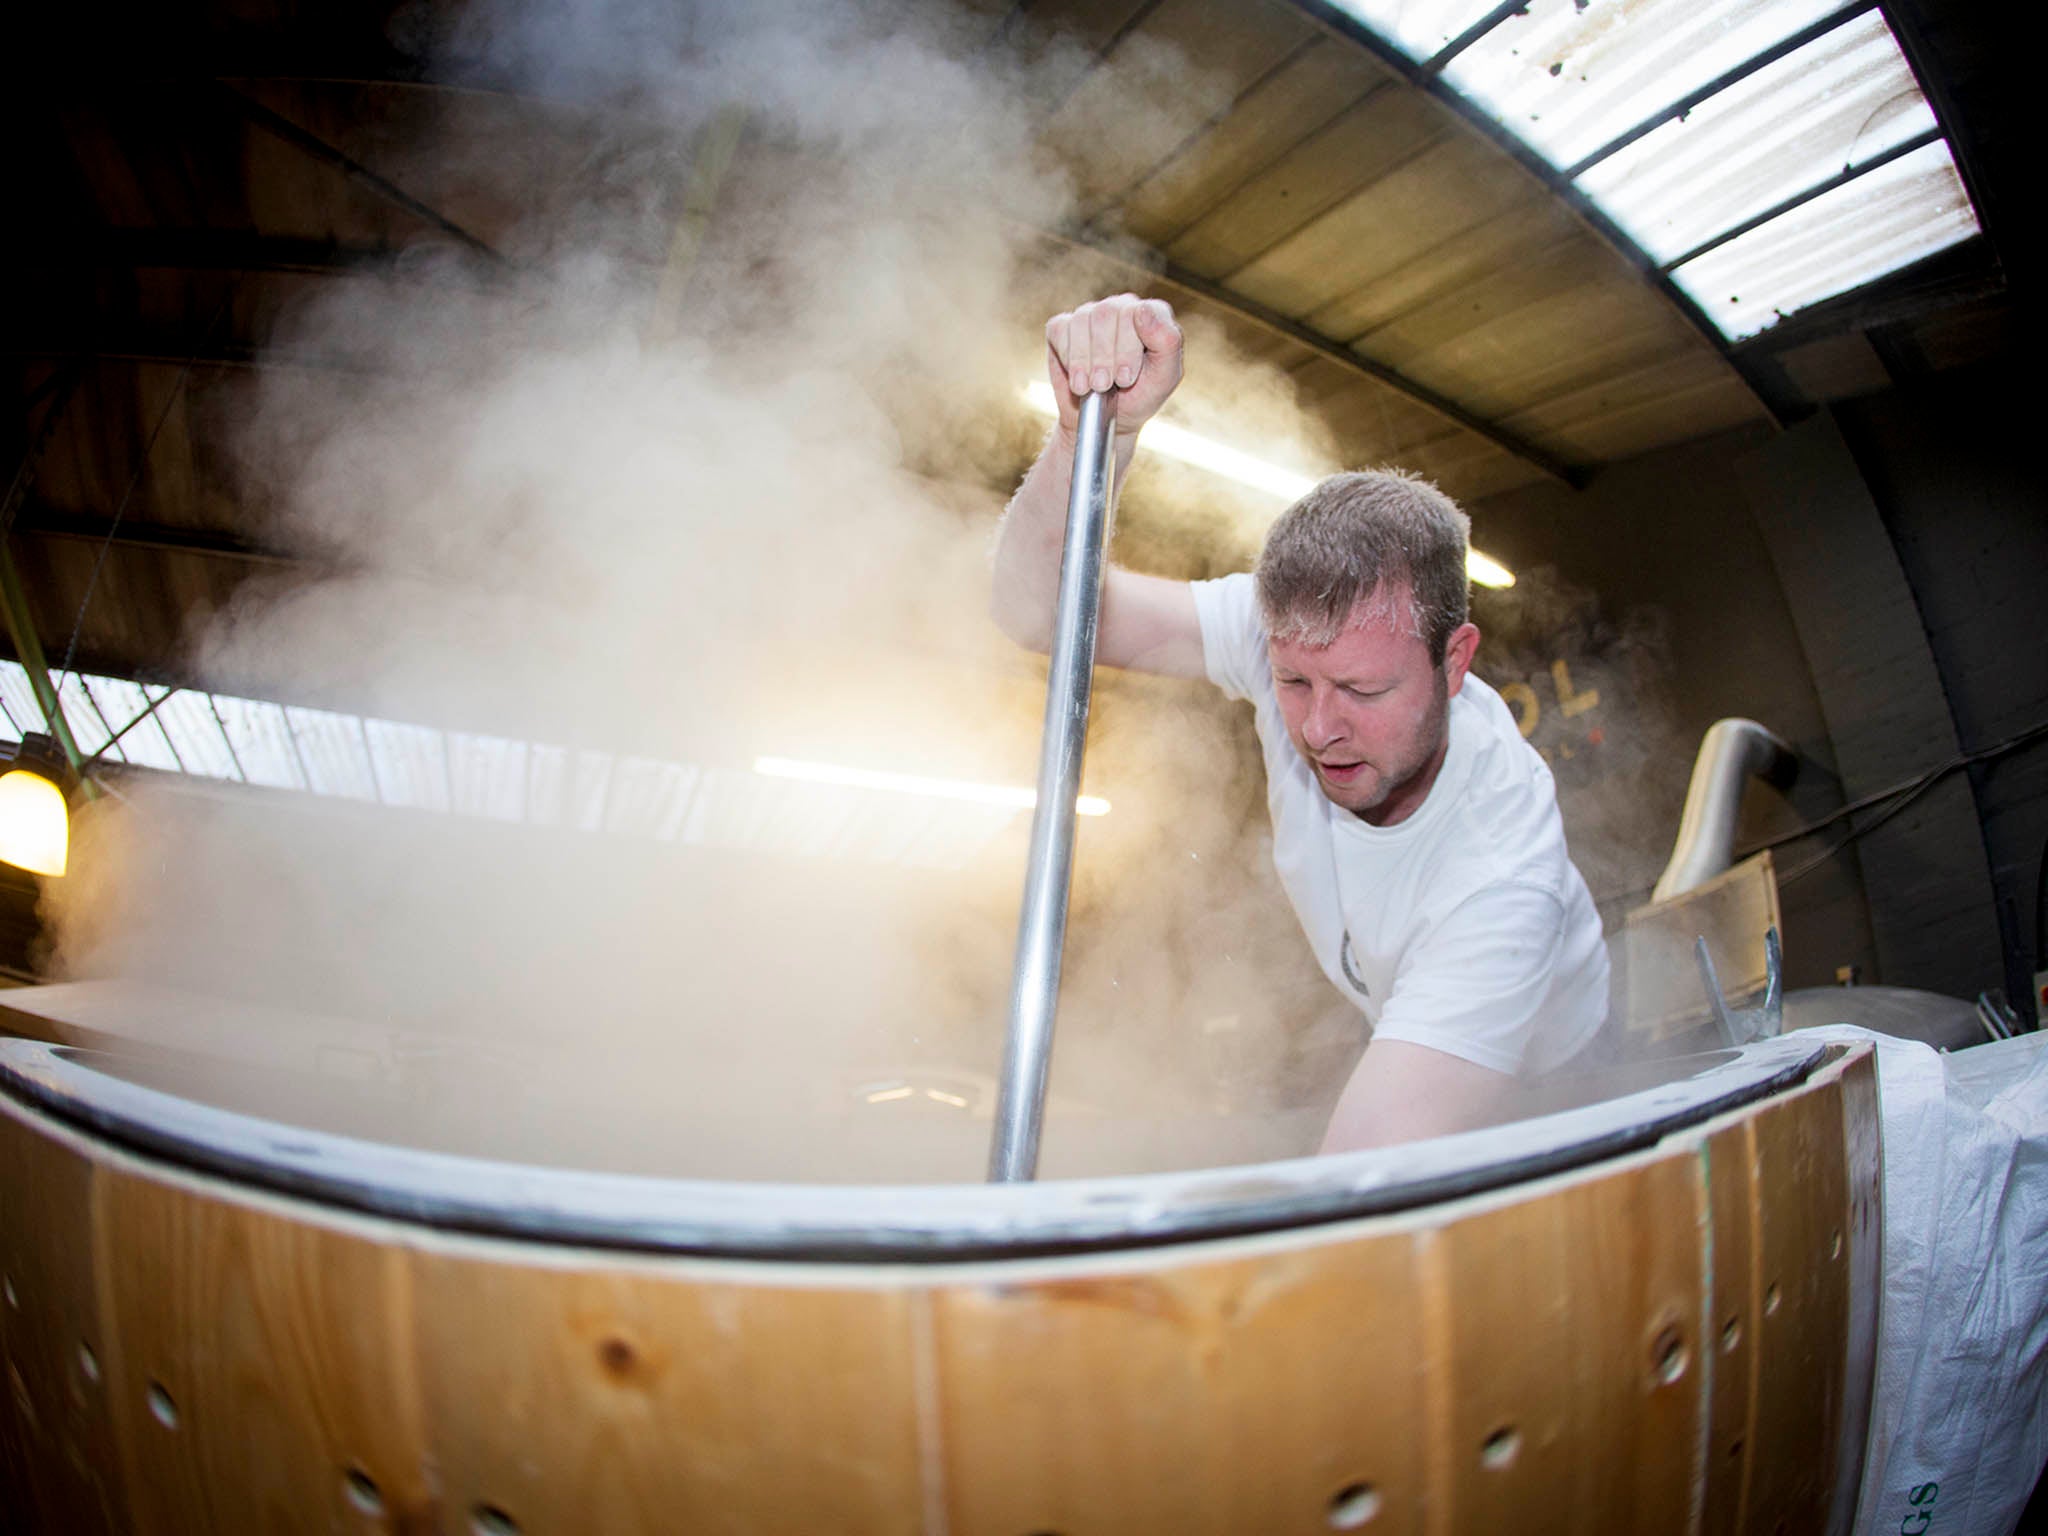 Stir it up: fermenting beer, or possibly the overthrow of capitalism